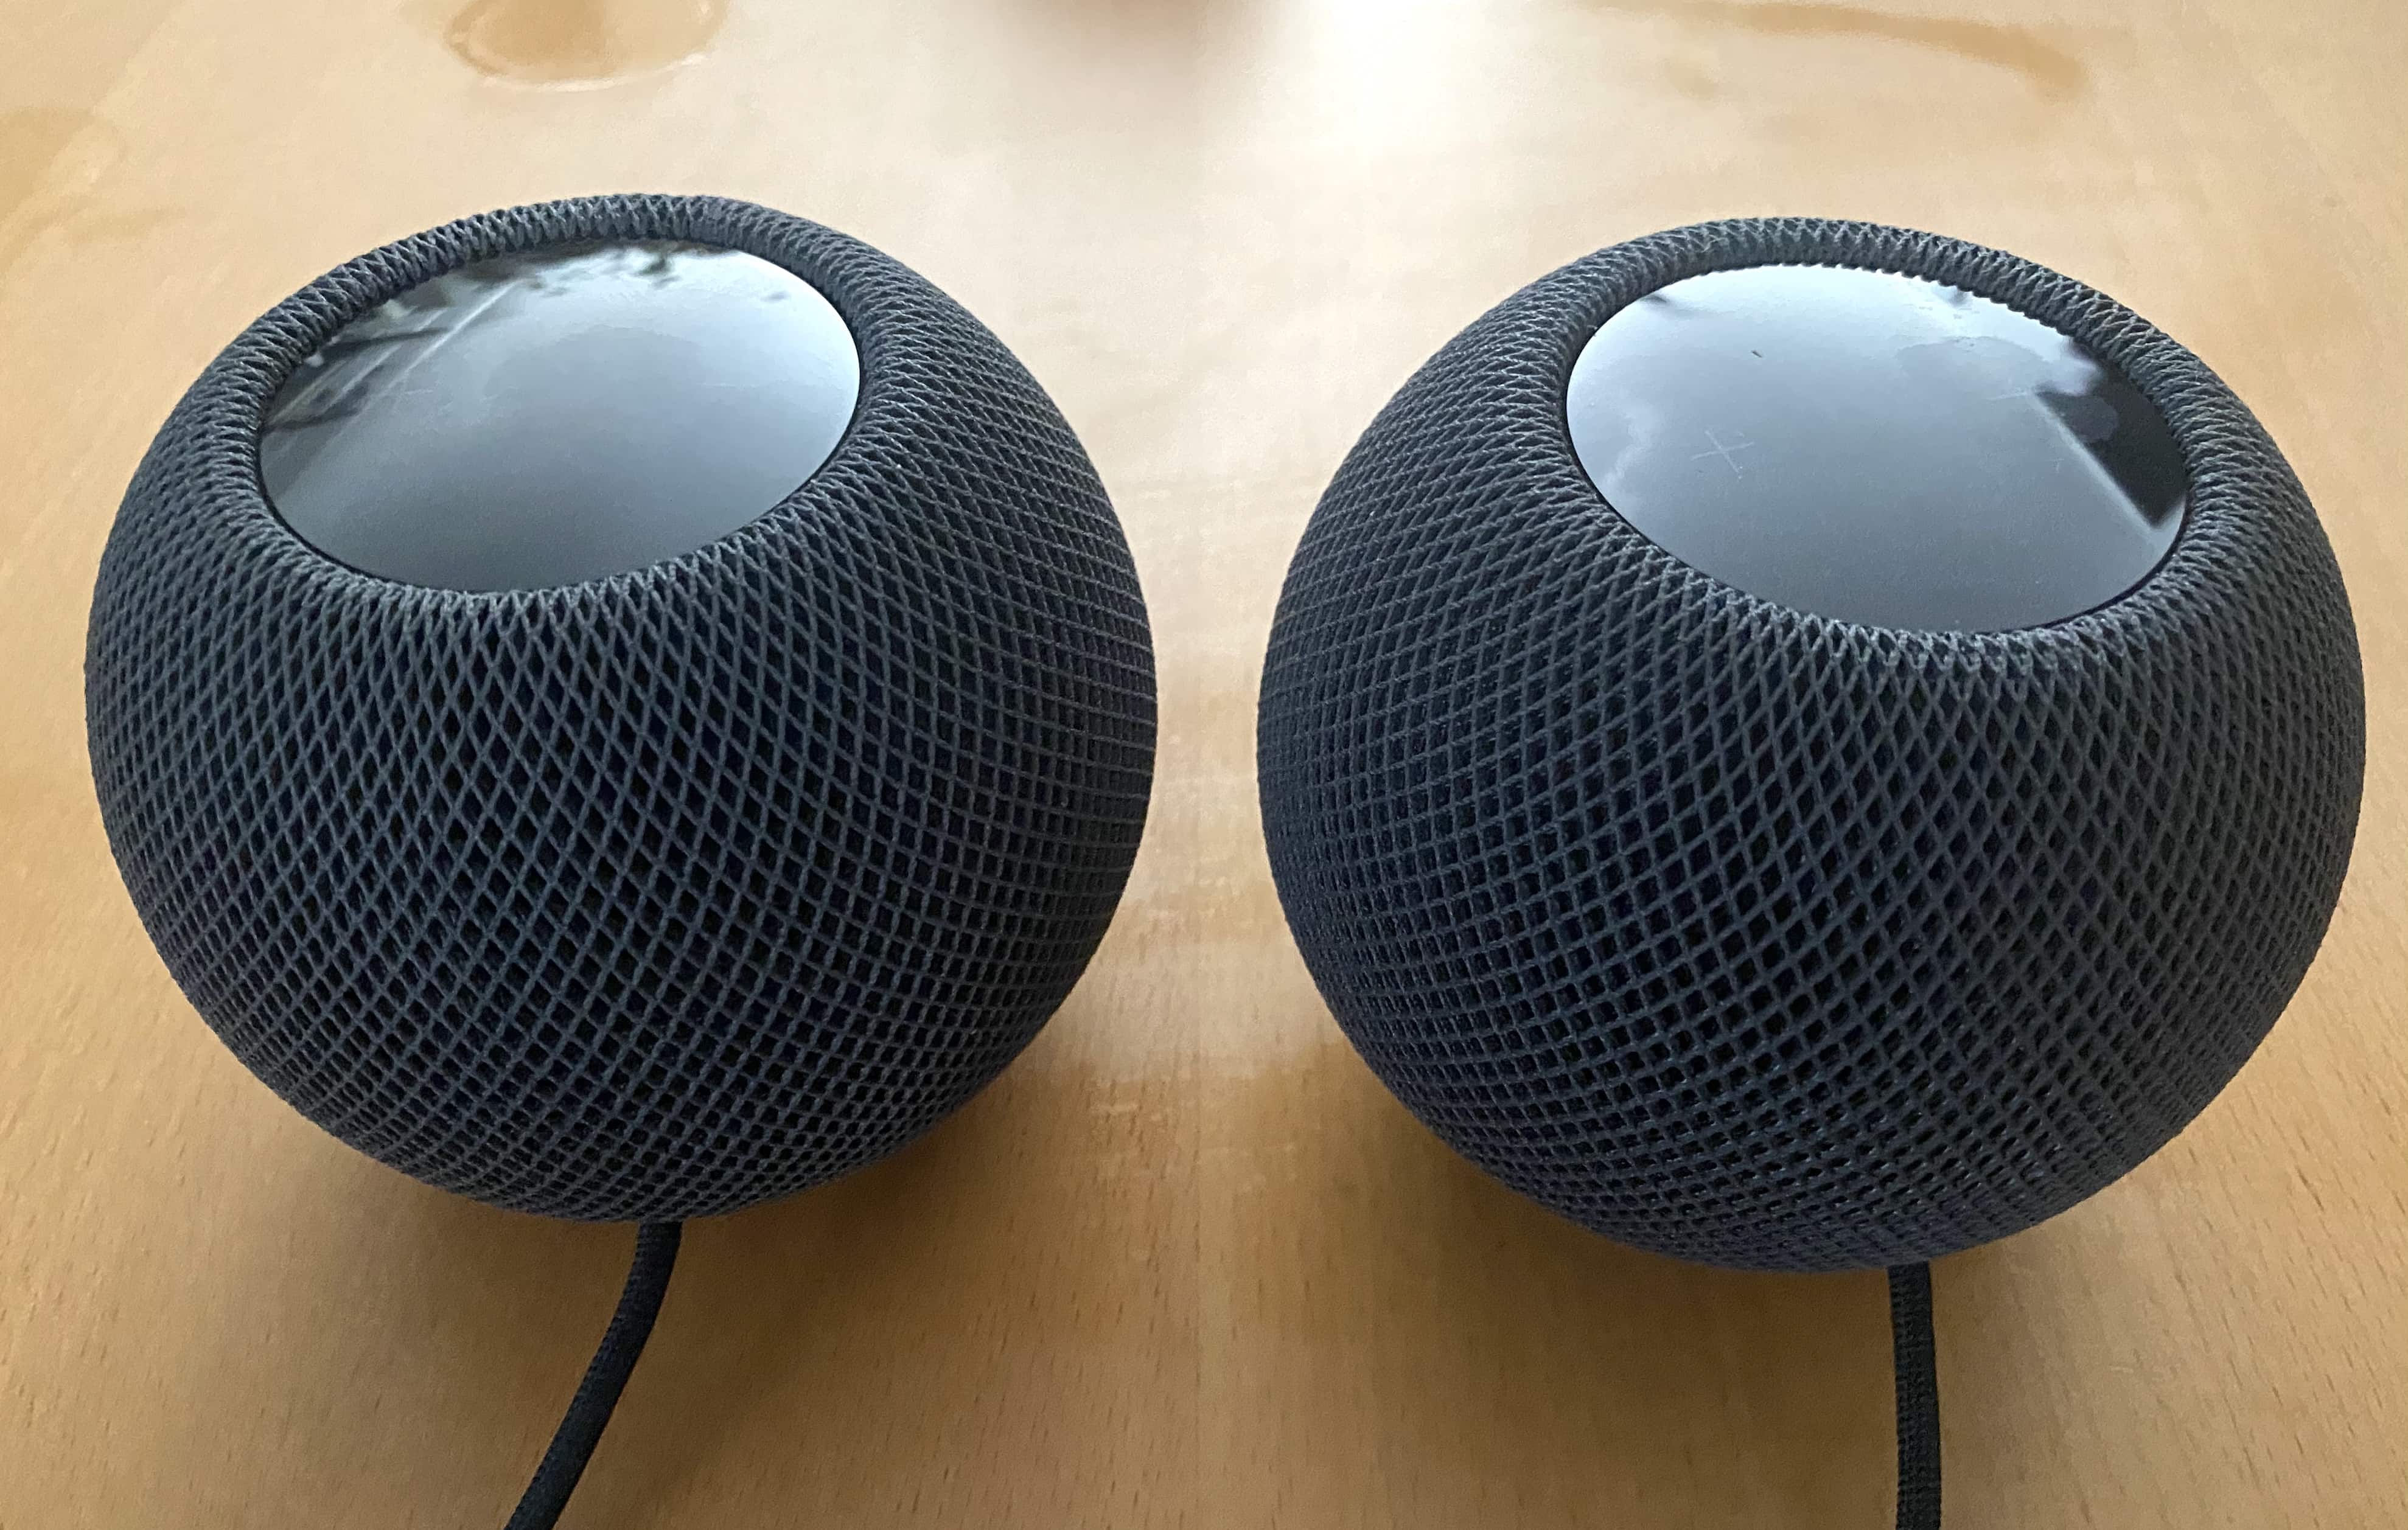 HomePod mini stereo pair: To get the best sound out of the HomePod mini, get two of them.